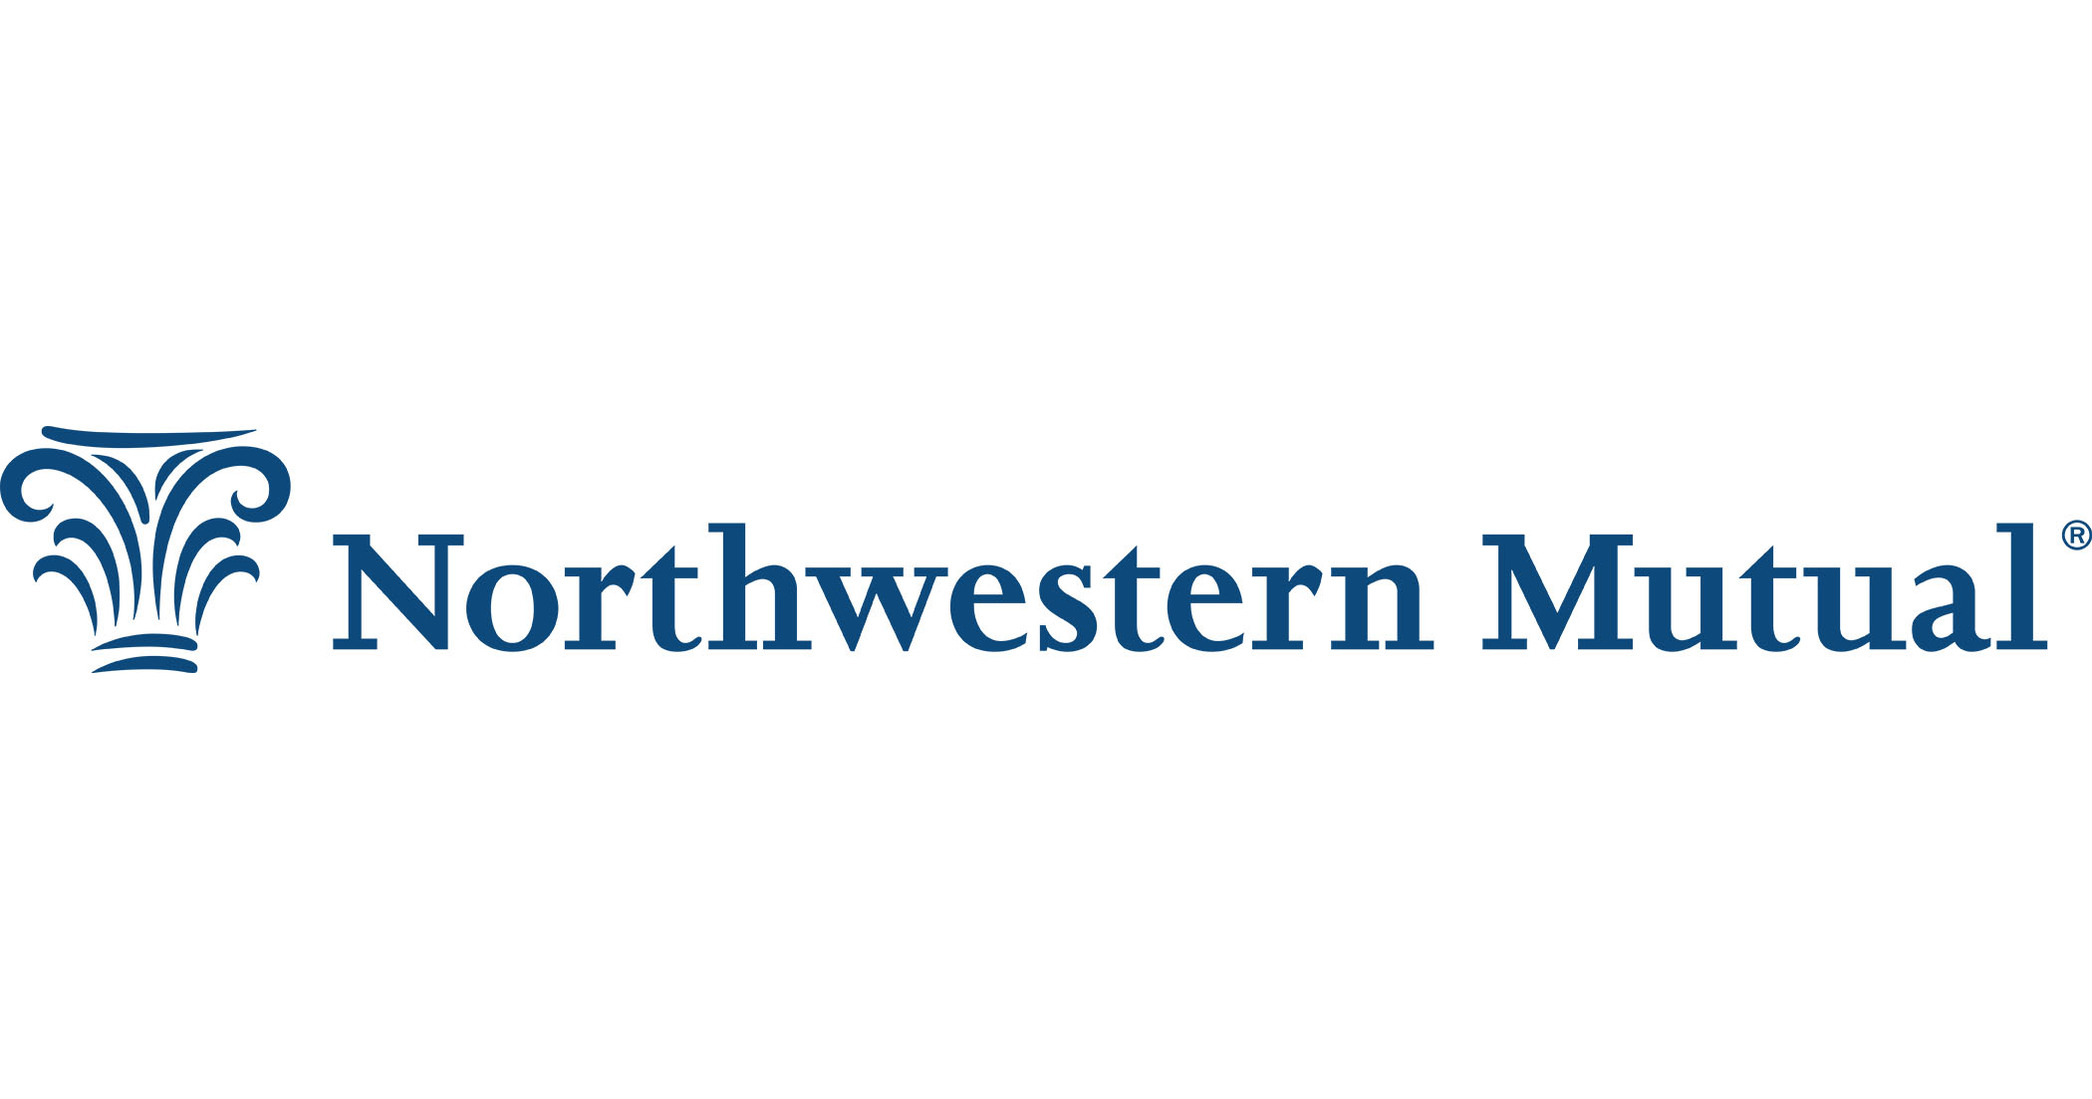 Check out Bradley Behrens at Northwestern Mutual